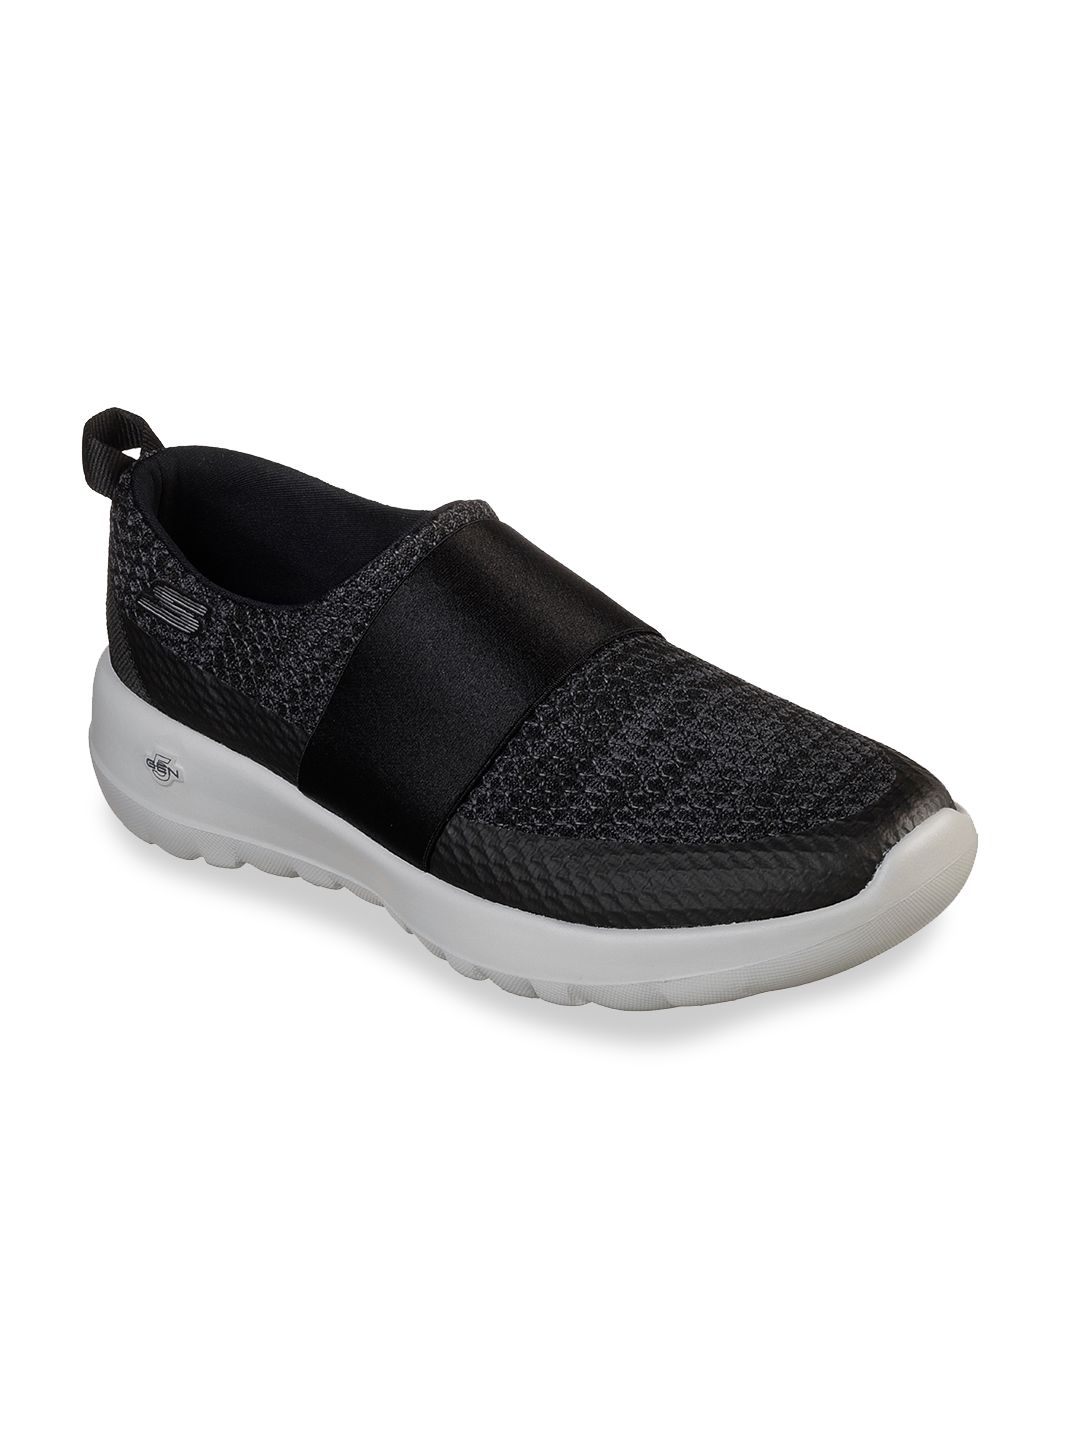 Skechers Women Black Textile Walking IMMENSE Non-Marking Shoes Price in India